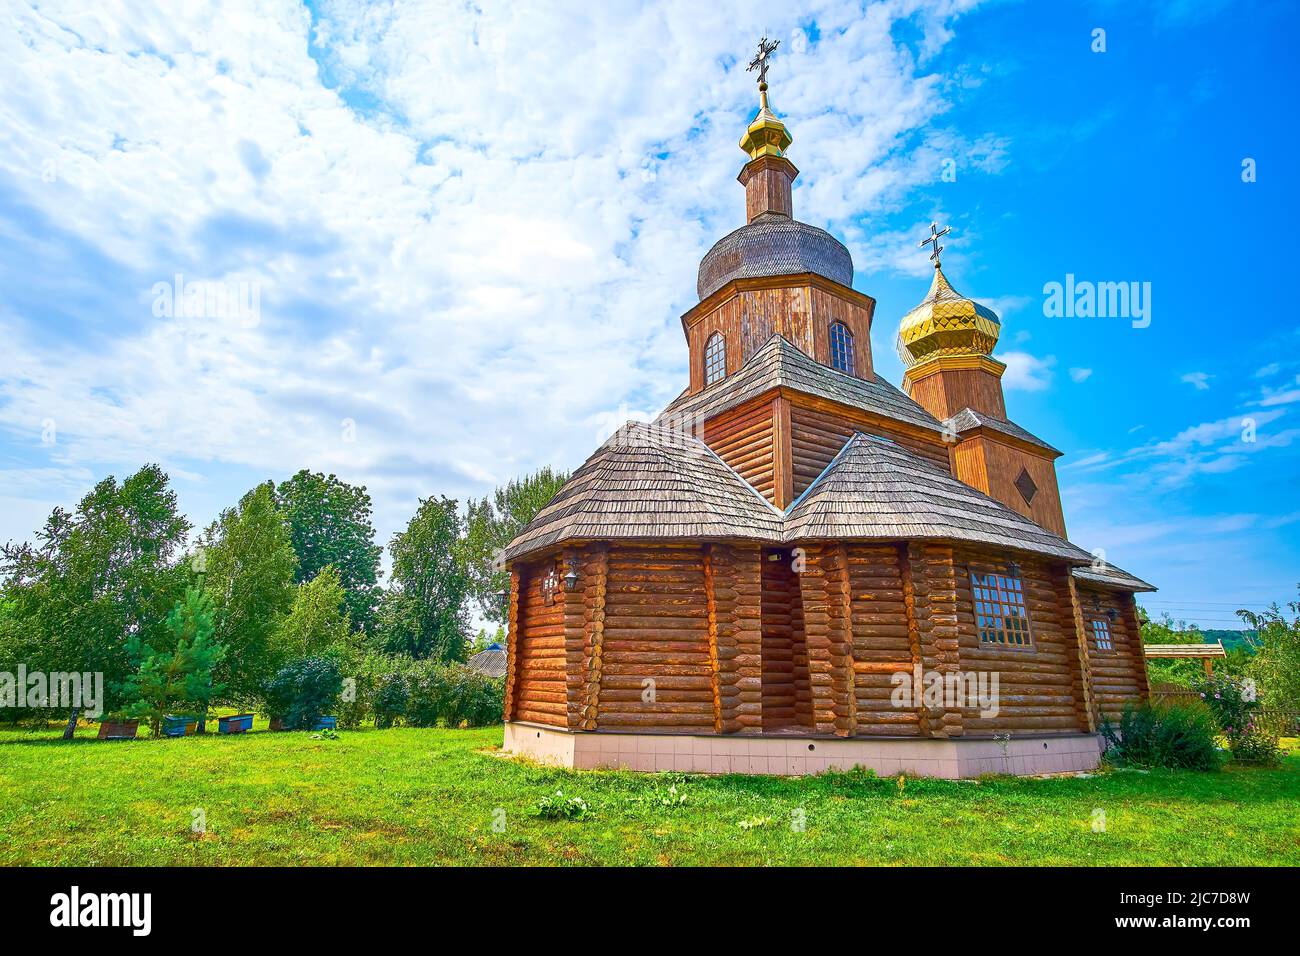 Historical wooden Church of the Intercession in made in typical Ukrainian style, Cherevki village, Ukraine Stock Photo